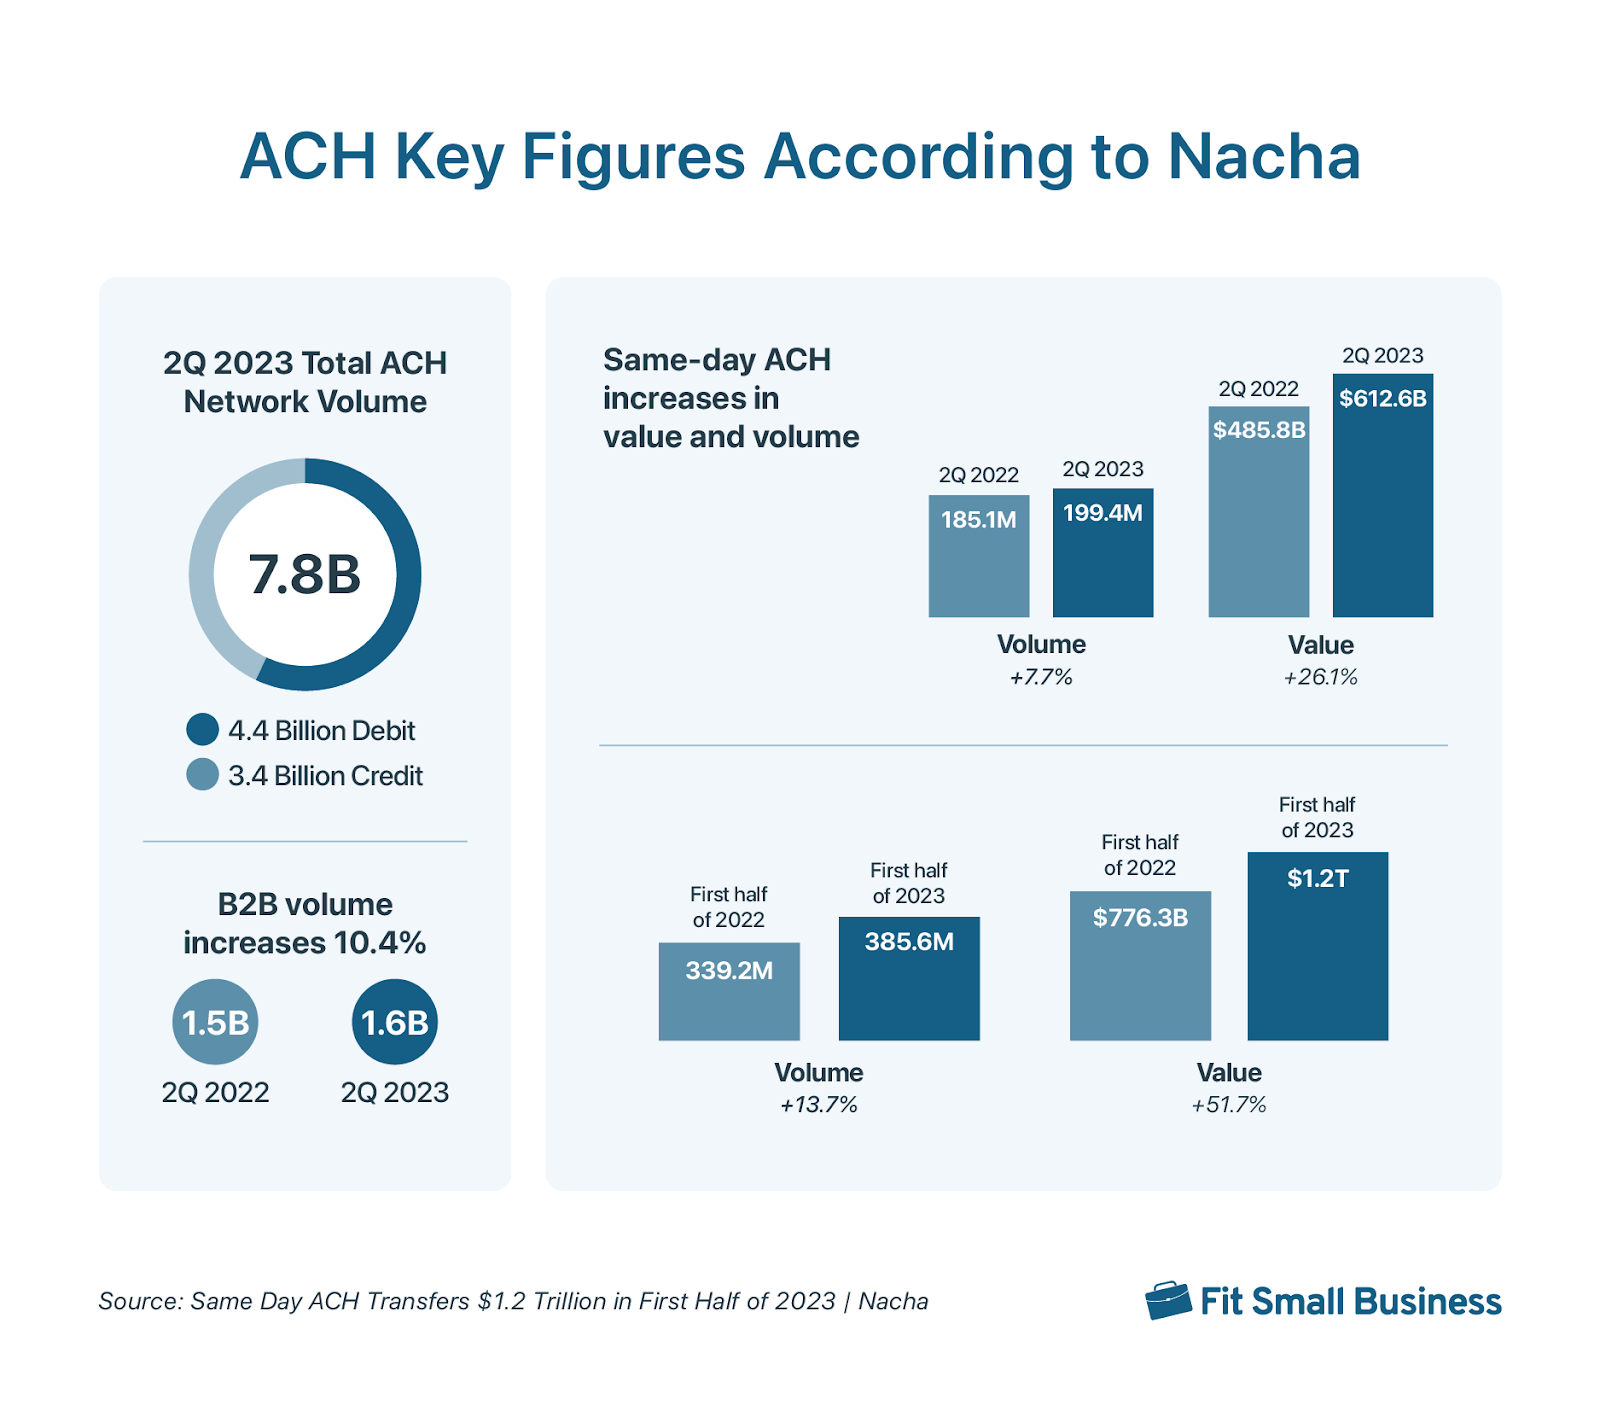 Infographic with key figures on ACH payments according to Nacha.